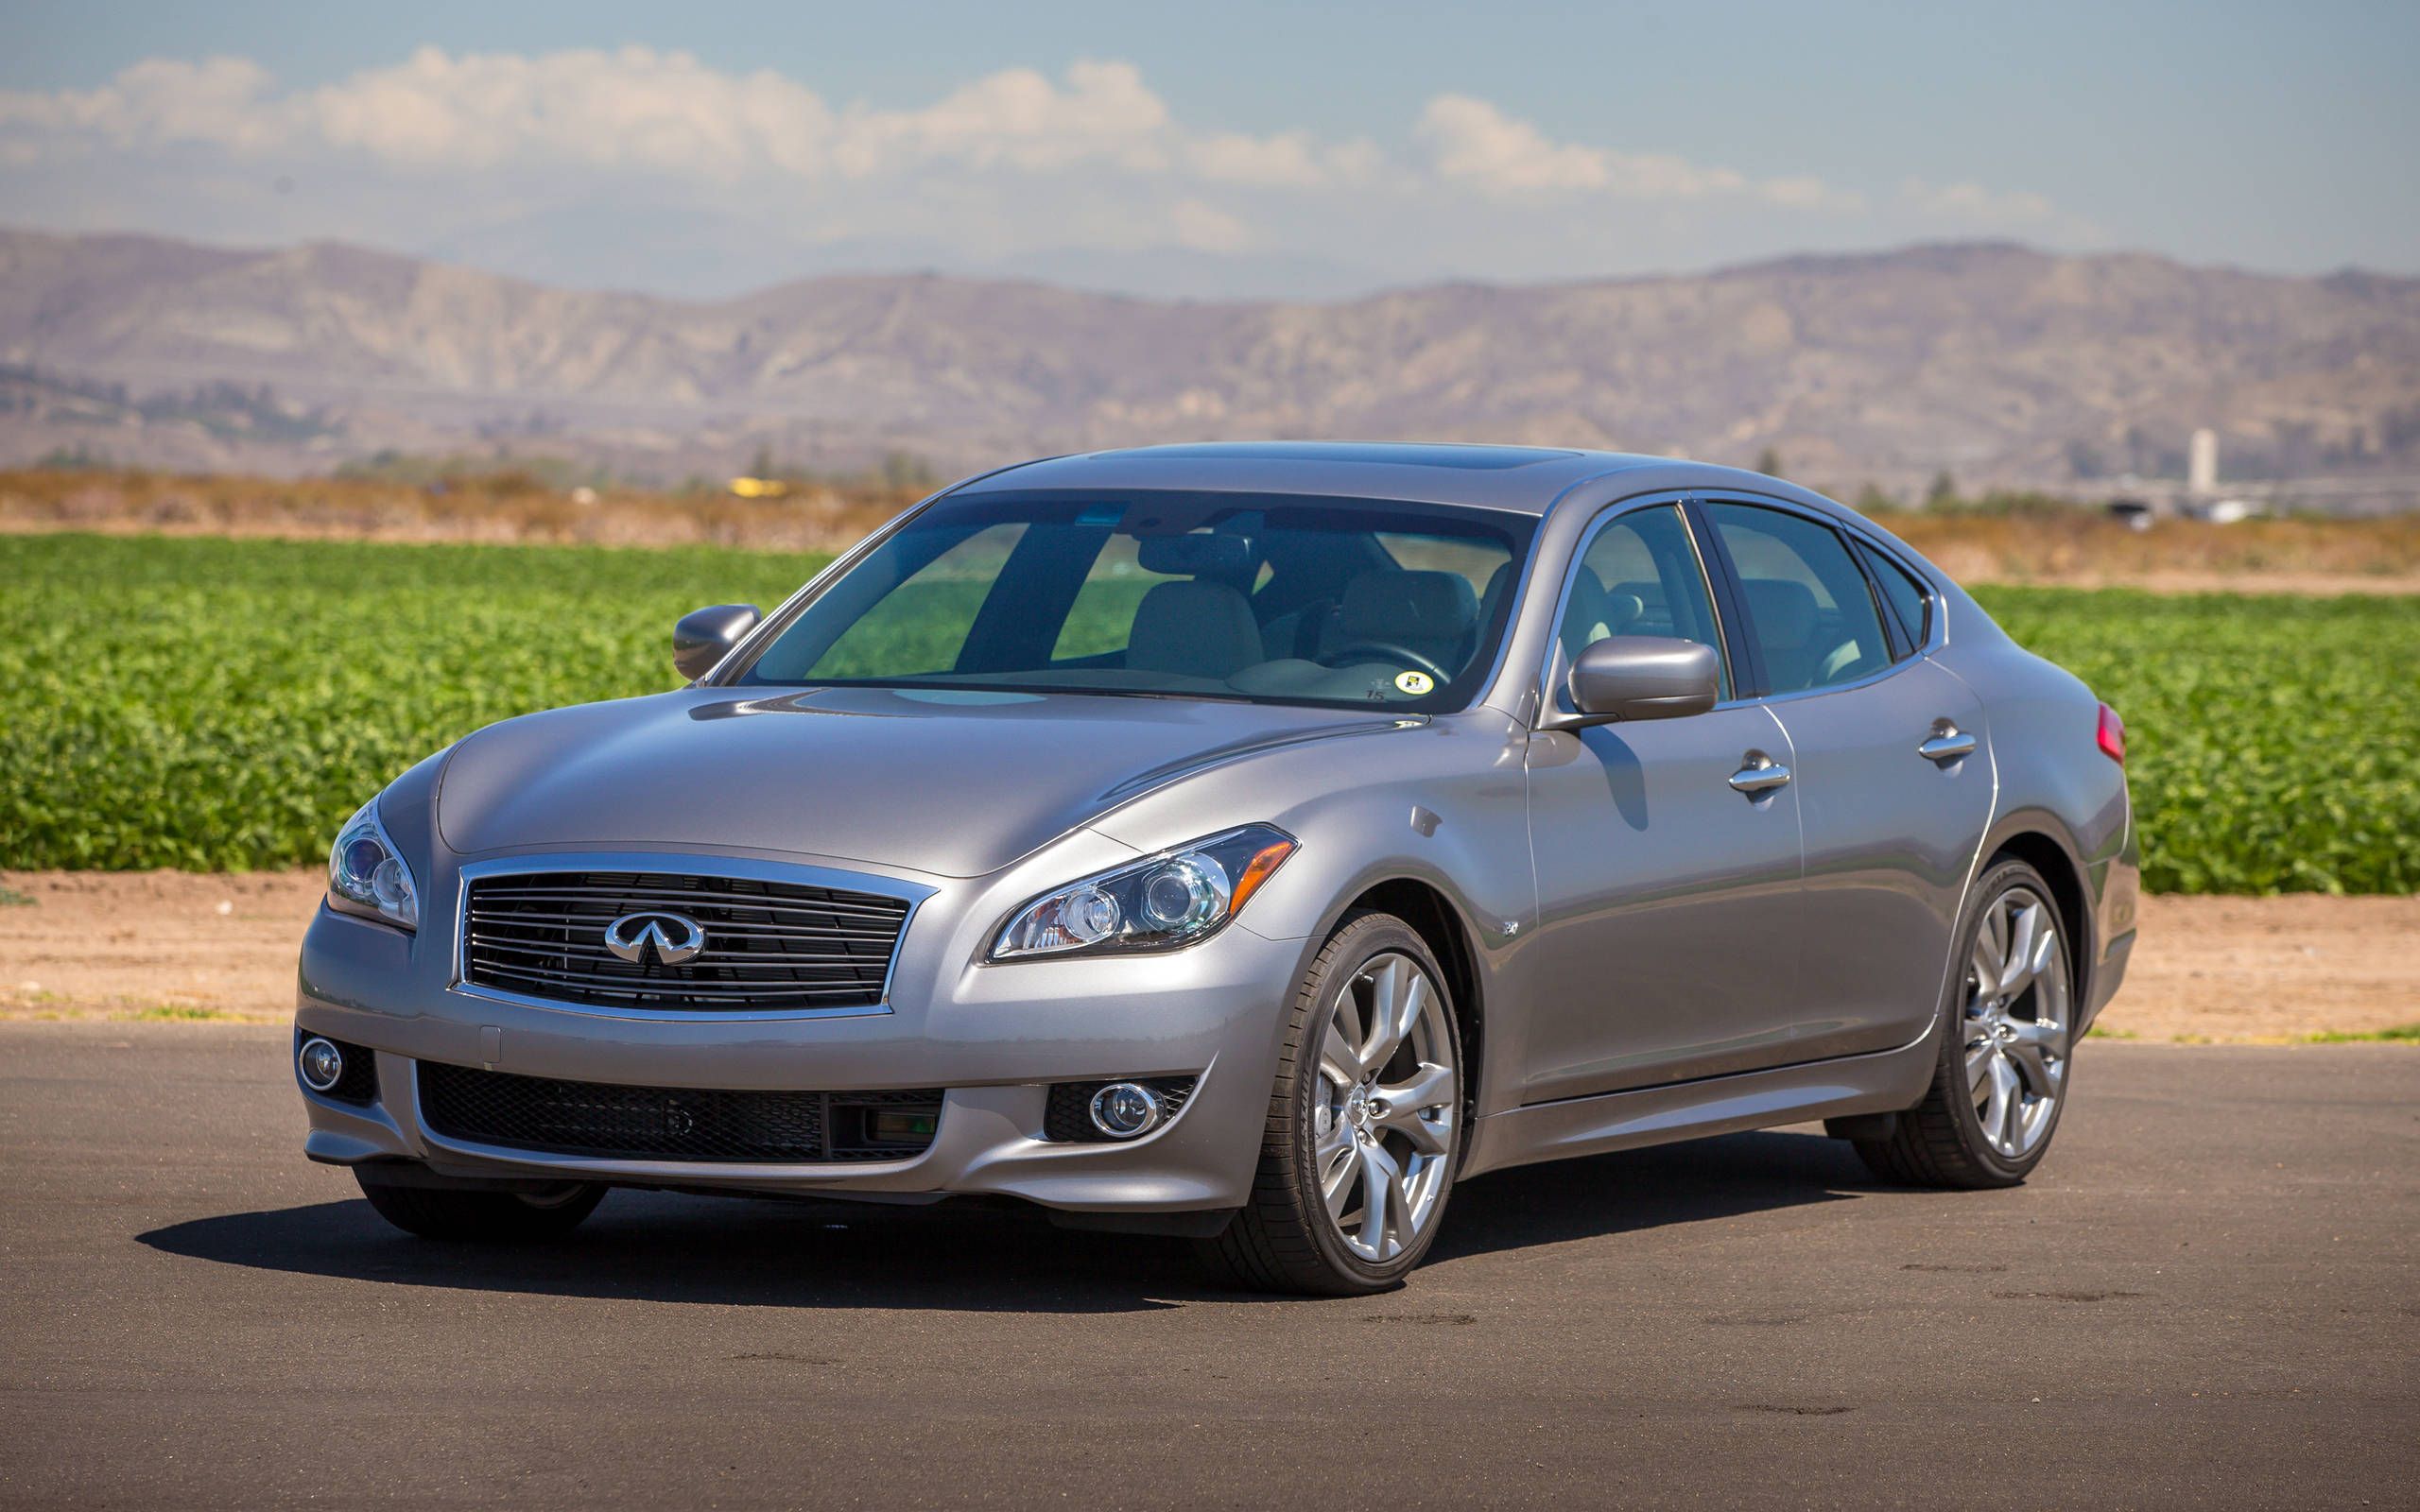 2014 Infiniti Q70 3.7 review notes